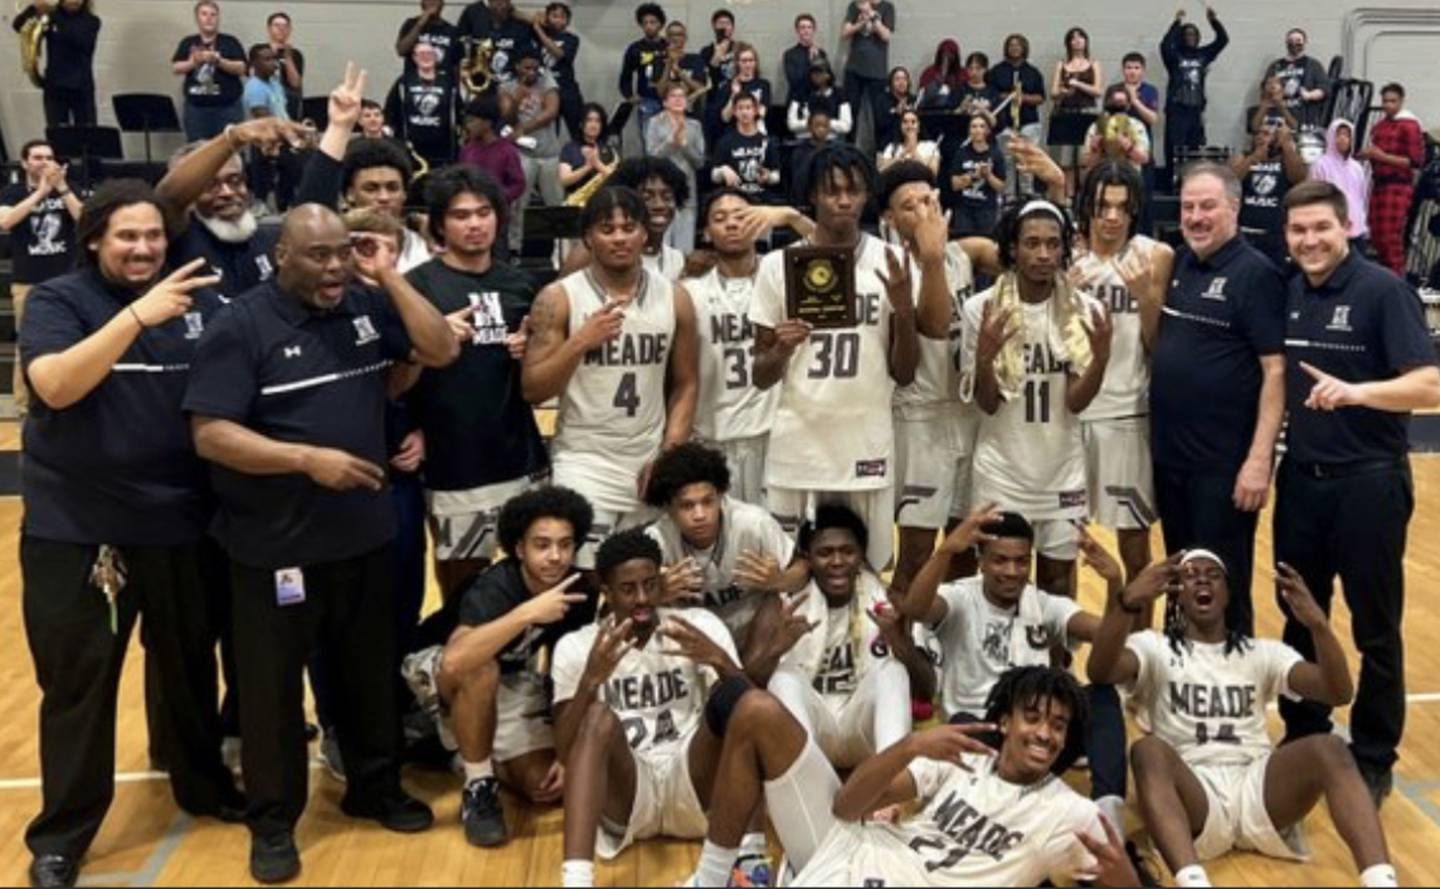 Meade High's boys basketball team repeated as Class 4A East Region I champions Thursday. The Mustangs converted 17-of-21 free throws in the fourth quarter to hold off Reservoir.